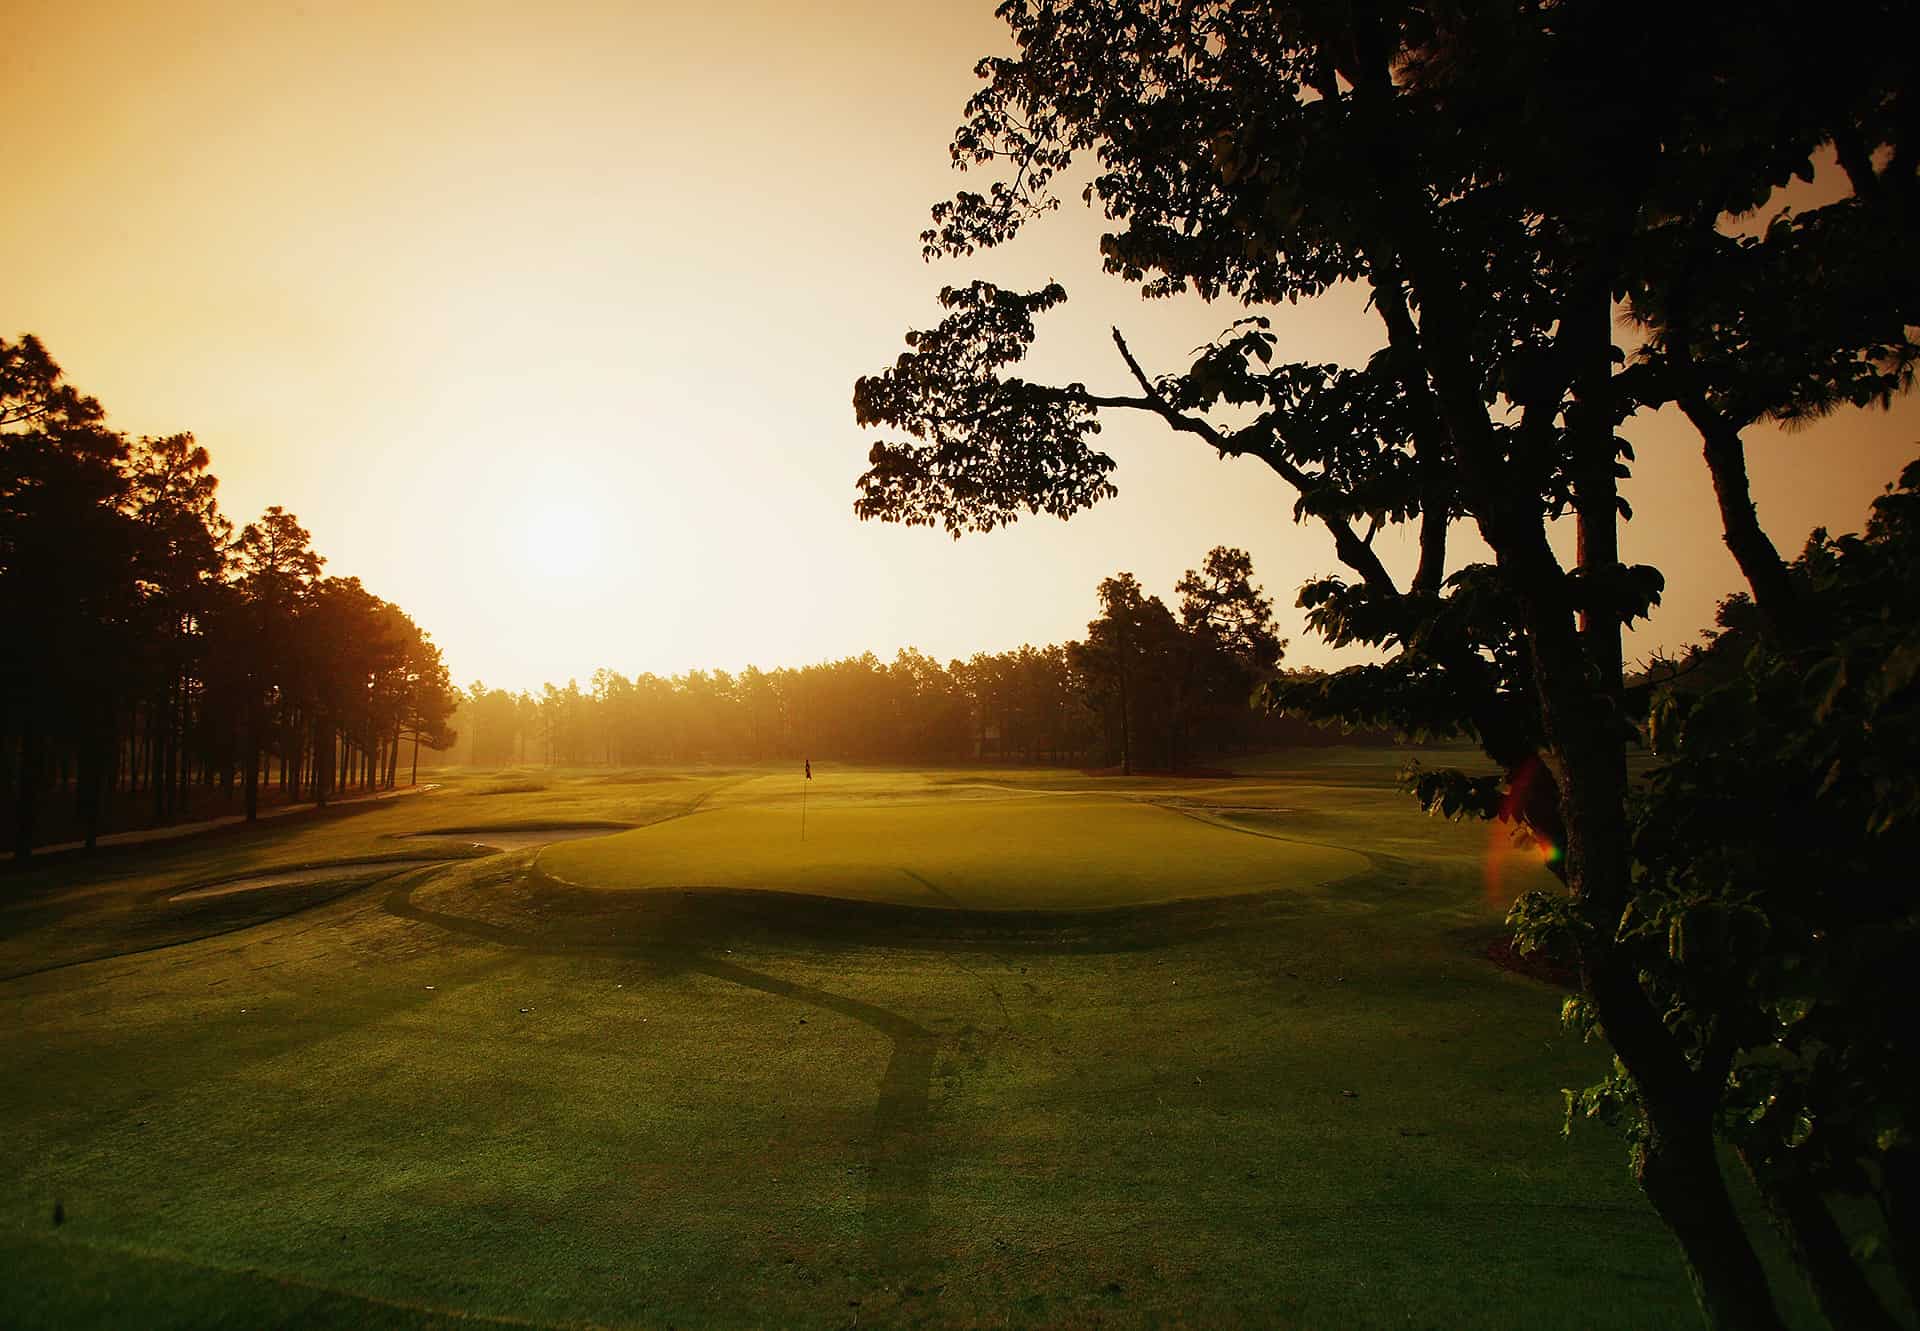 WIN! A trip to the Carolinas with the NCG Top 100s Summer Matchplay